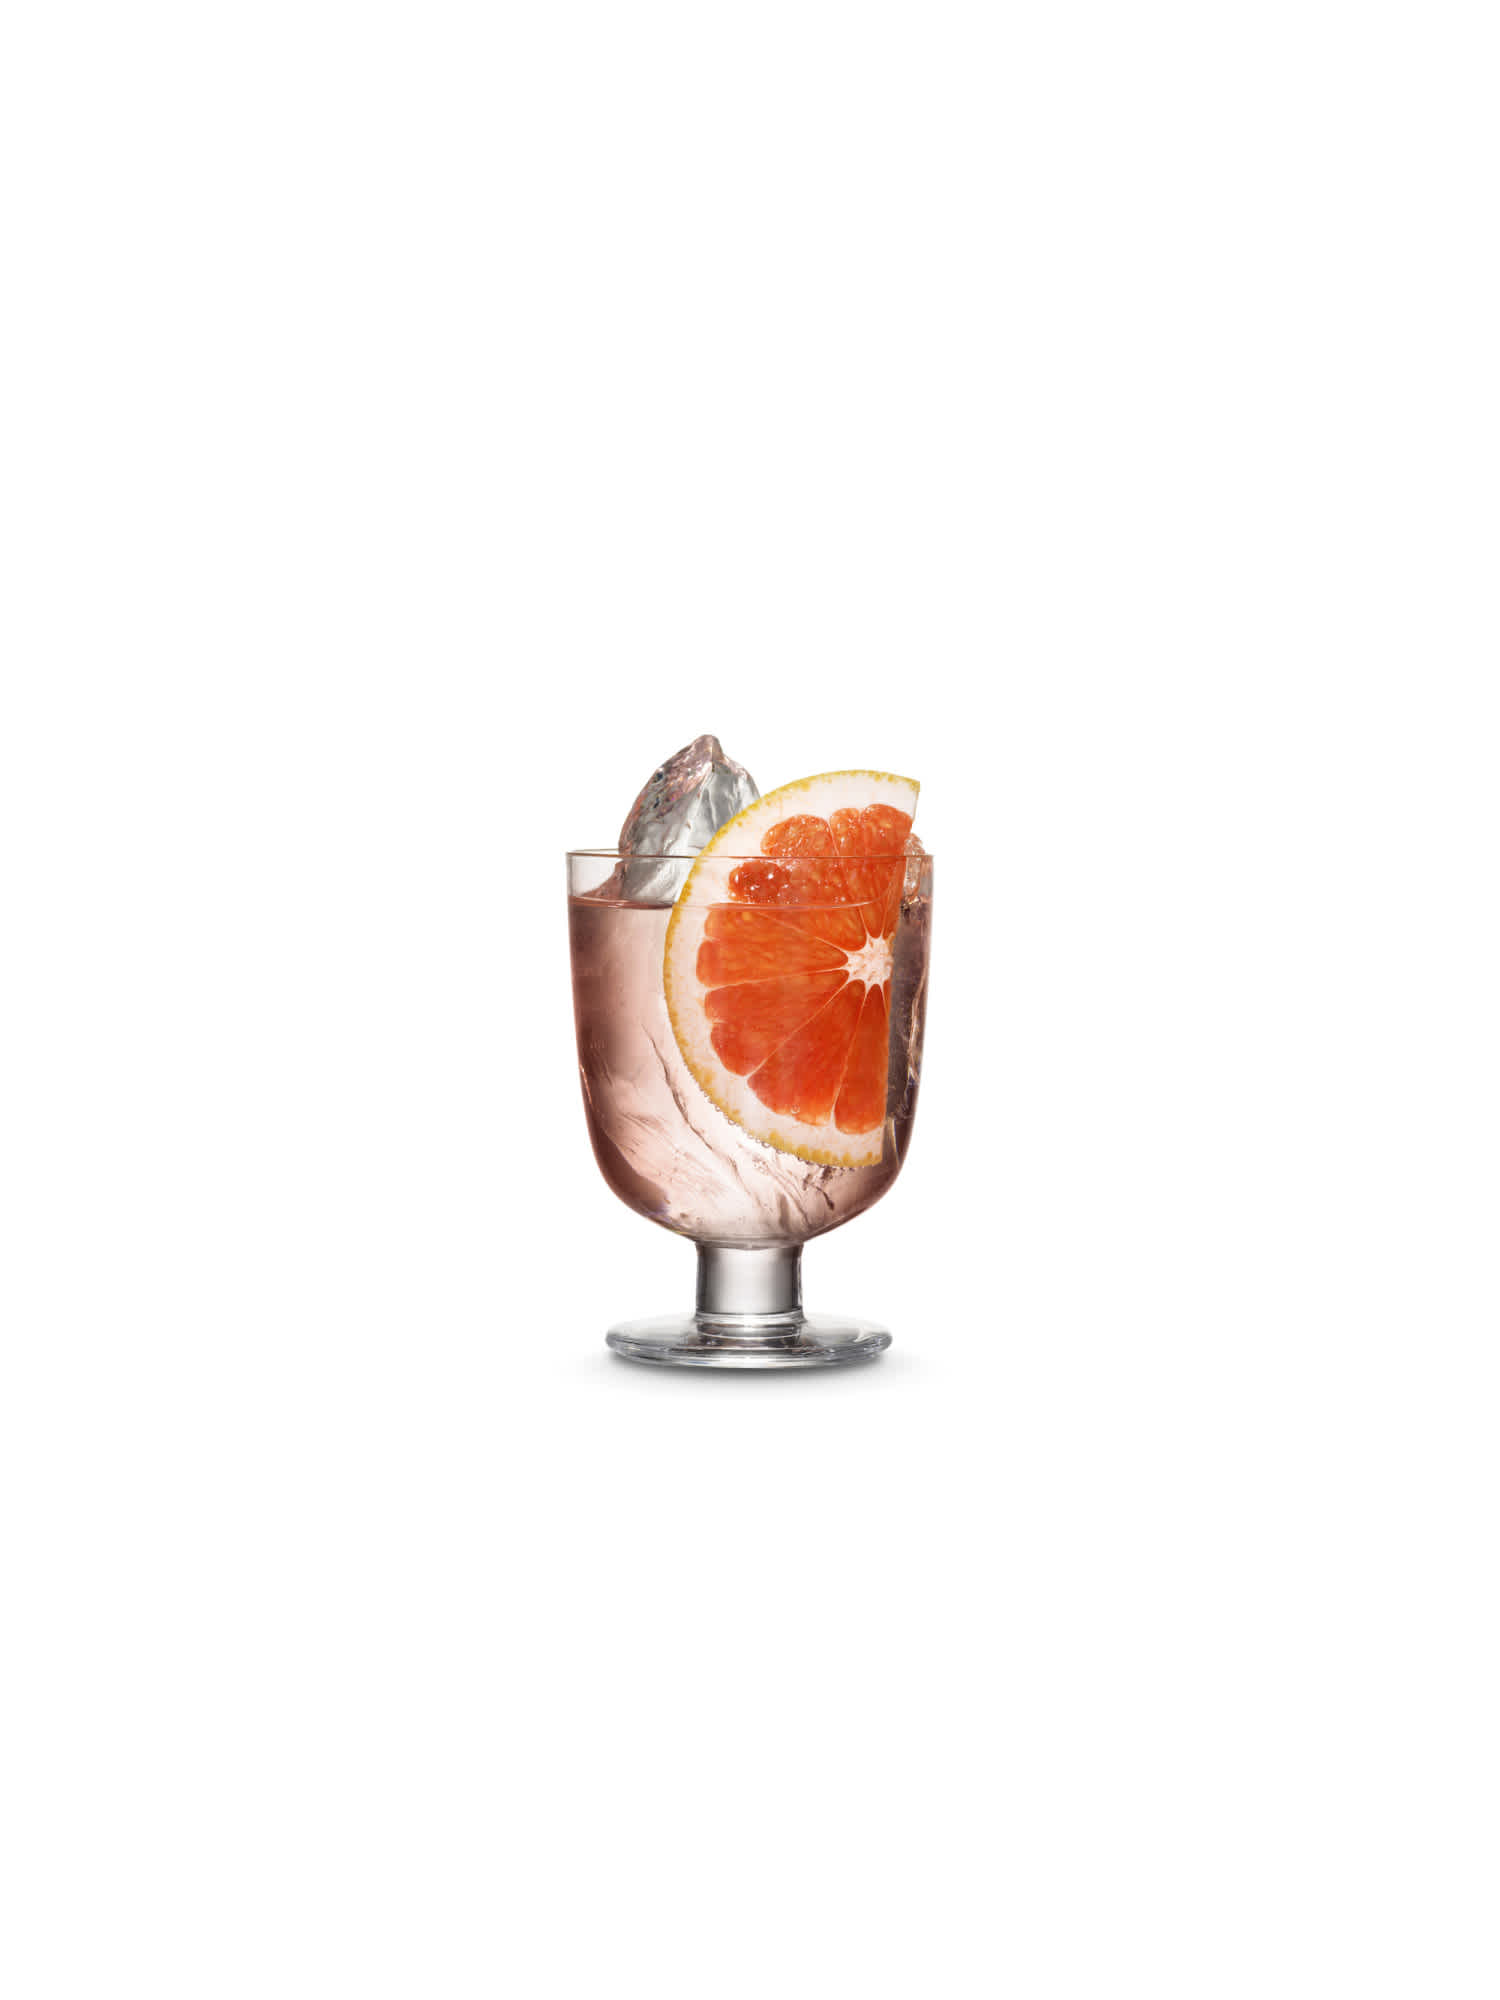 Kyrö Pink Gin & Tonic perfect serve in an Iittala cocktail glass, hand-cut shards of ice, and a slice of blood orange. Photo by KoskiSyväri.